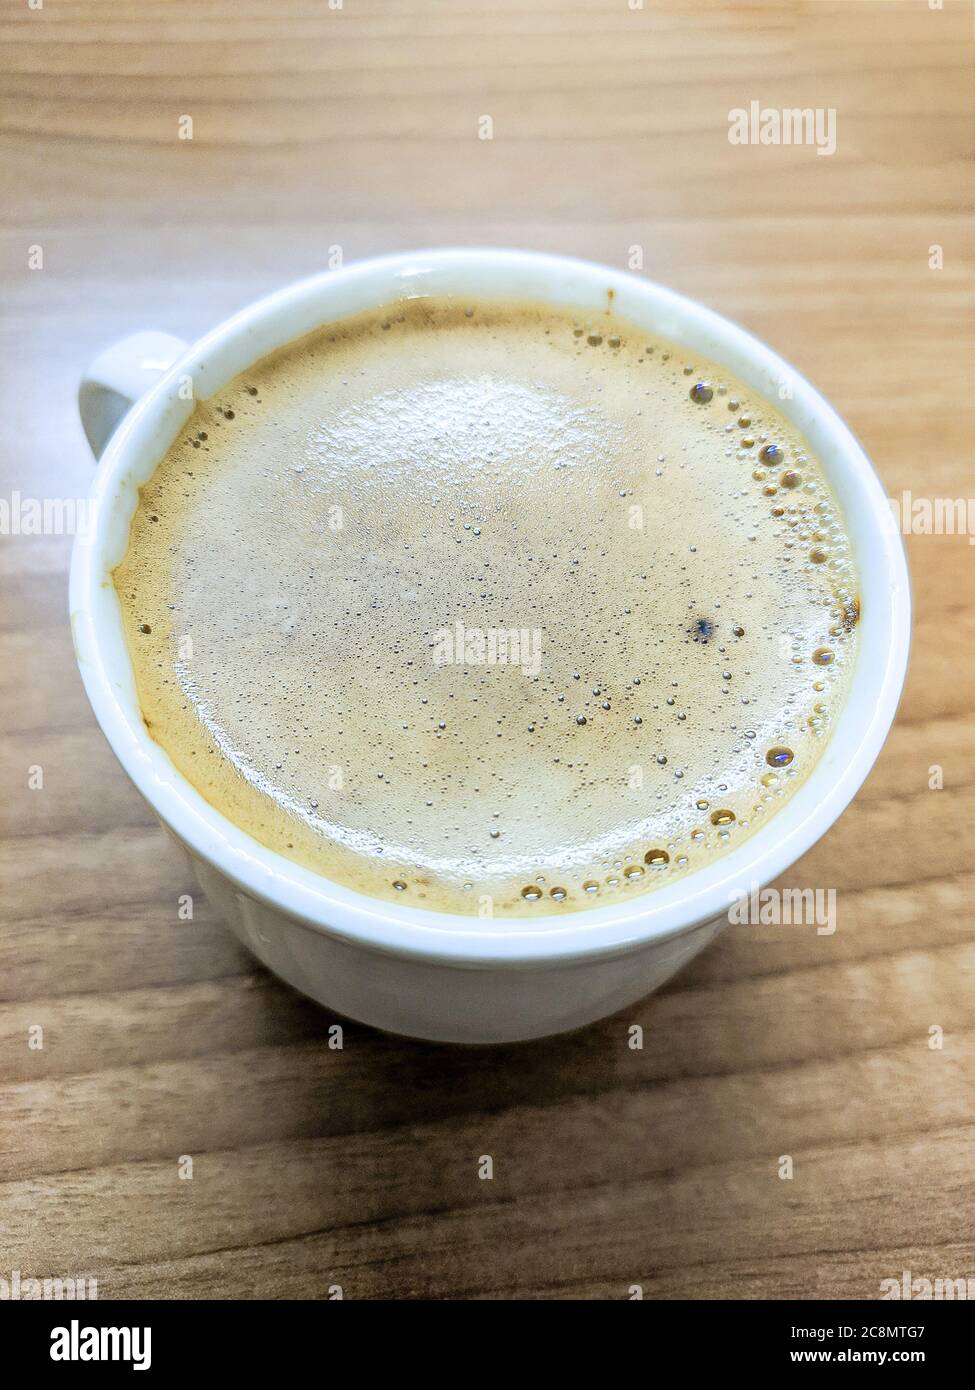 a cup of coffee in Damascus, Syria Stock Photo